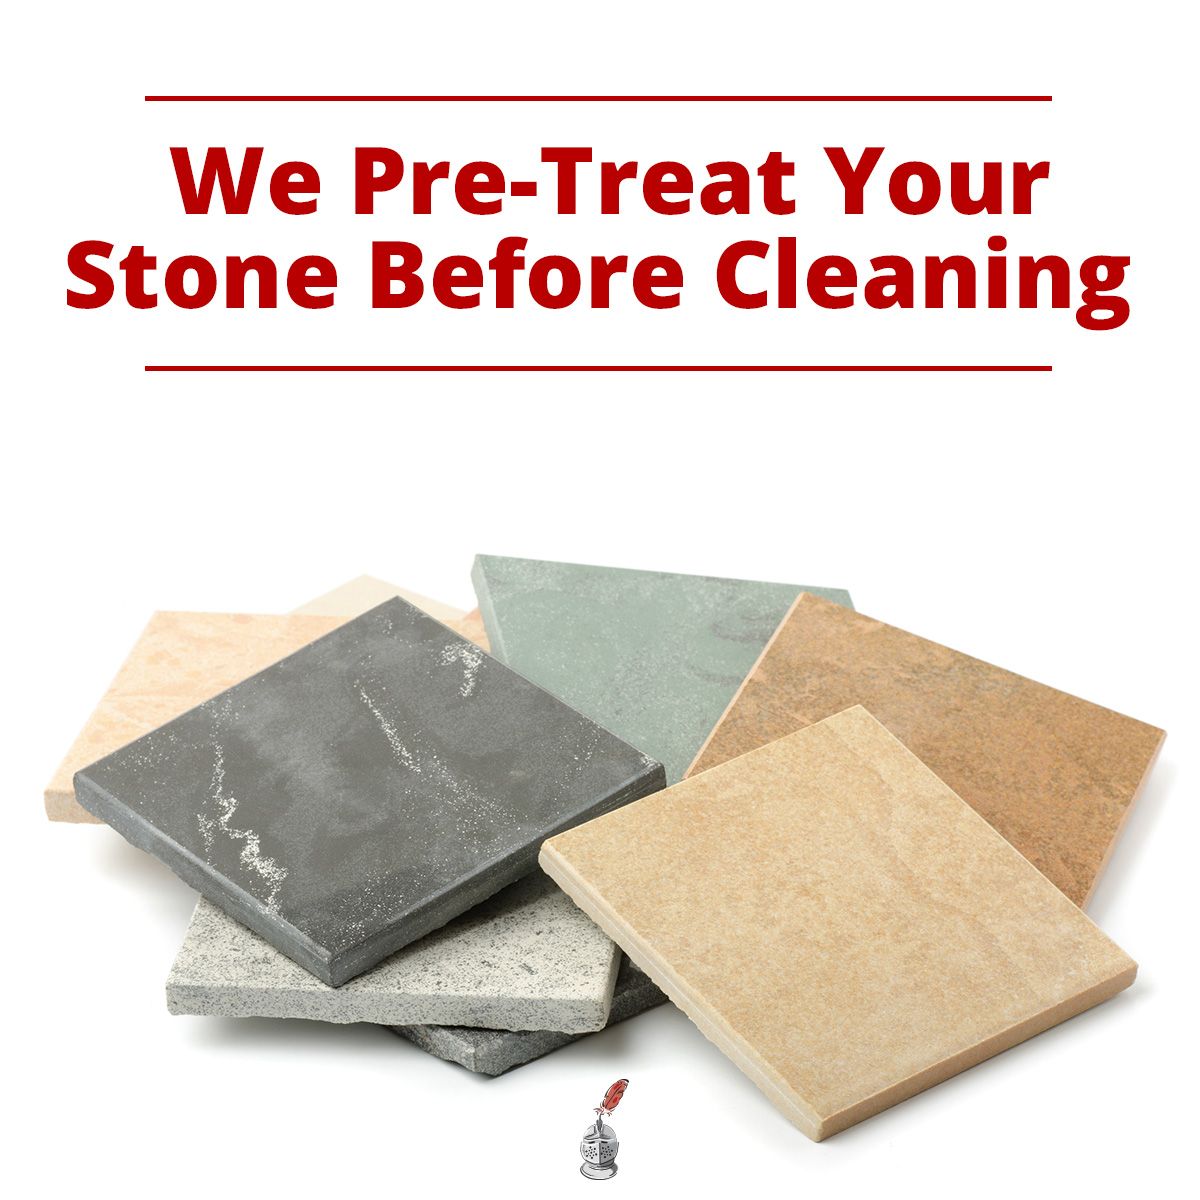 We Pre-Treat Your Stone Before Cleaning